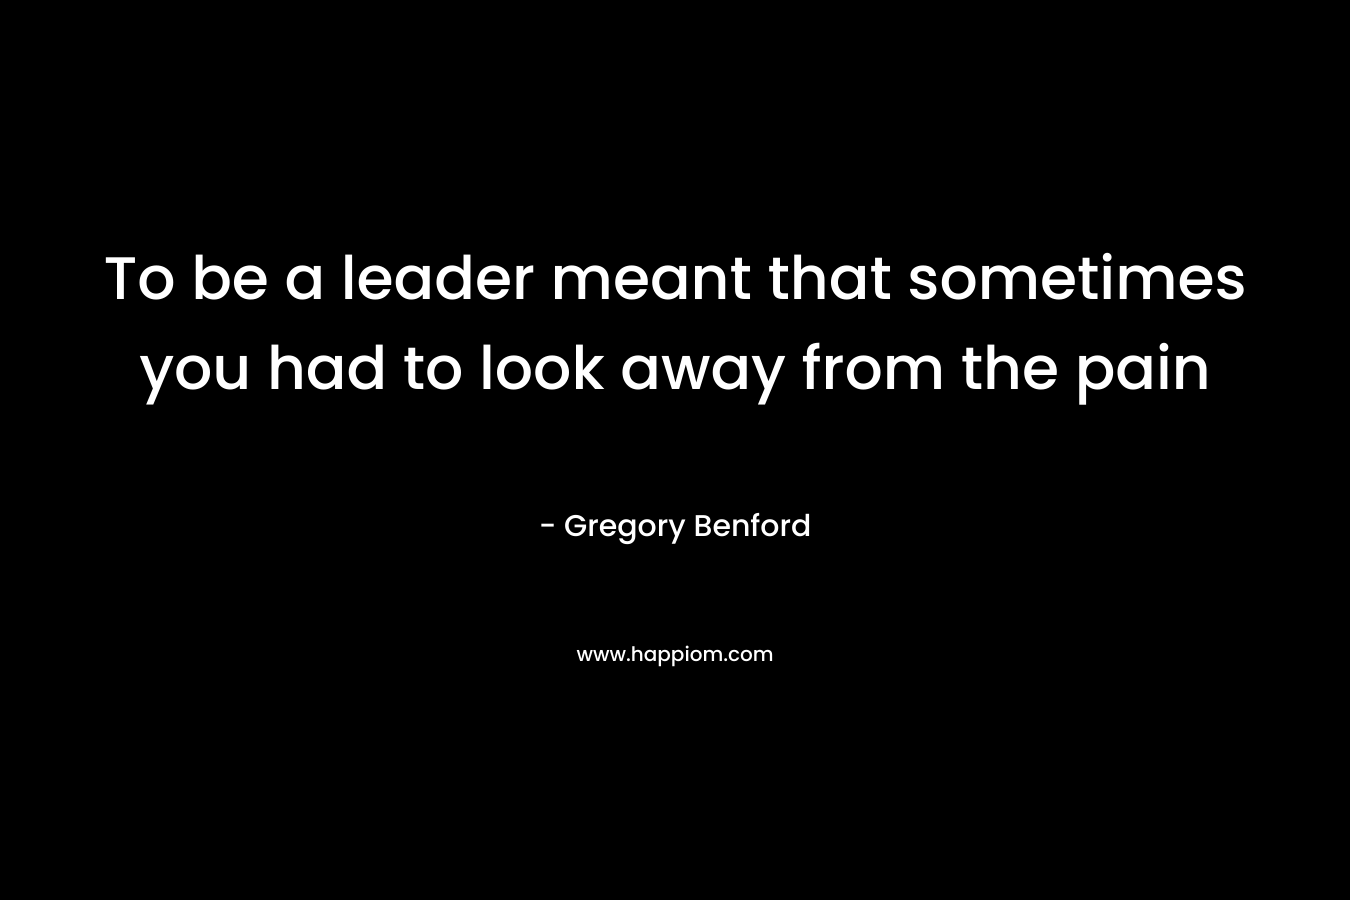 To be a leader meant that sometimes you had to look away from the pain – Gregory Benford